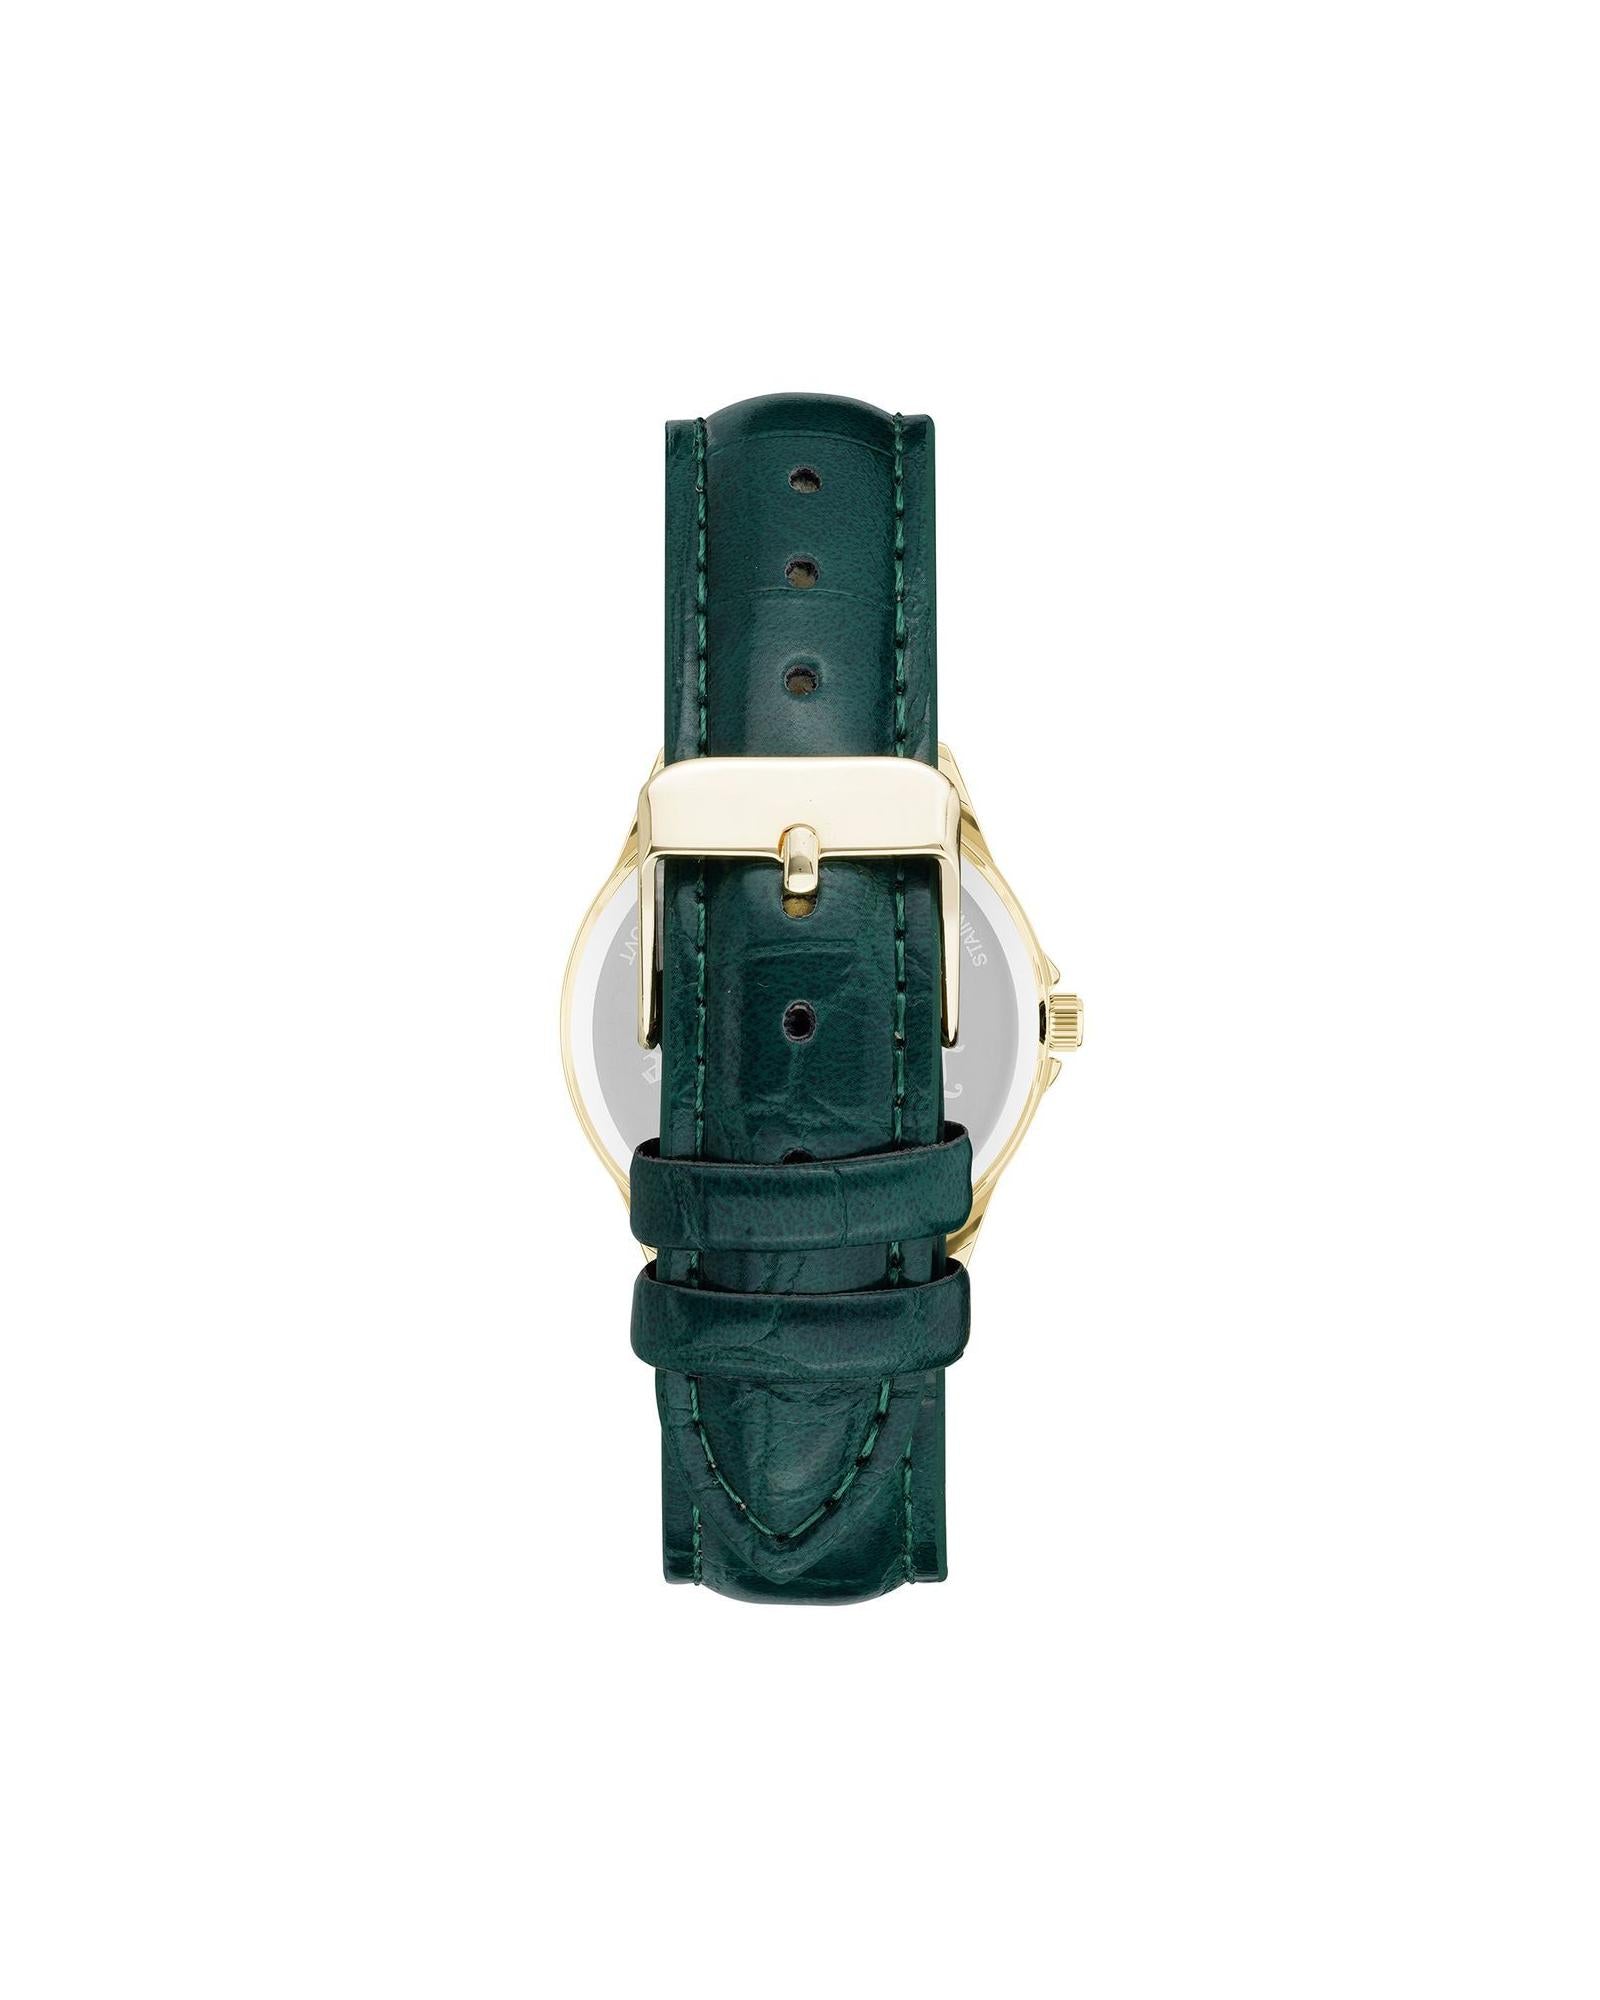 Gold Fashion Analog Watch with Rhine Stone Facing and Green Leatherette Strap One Size Women